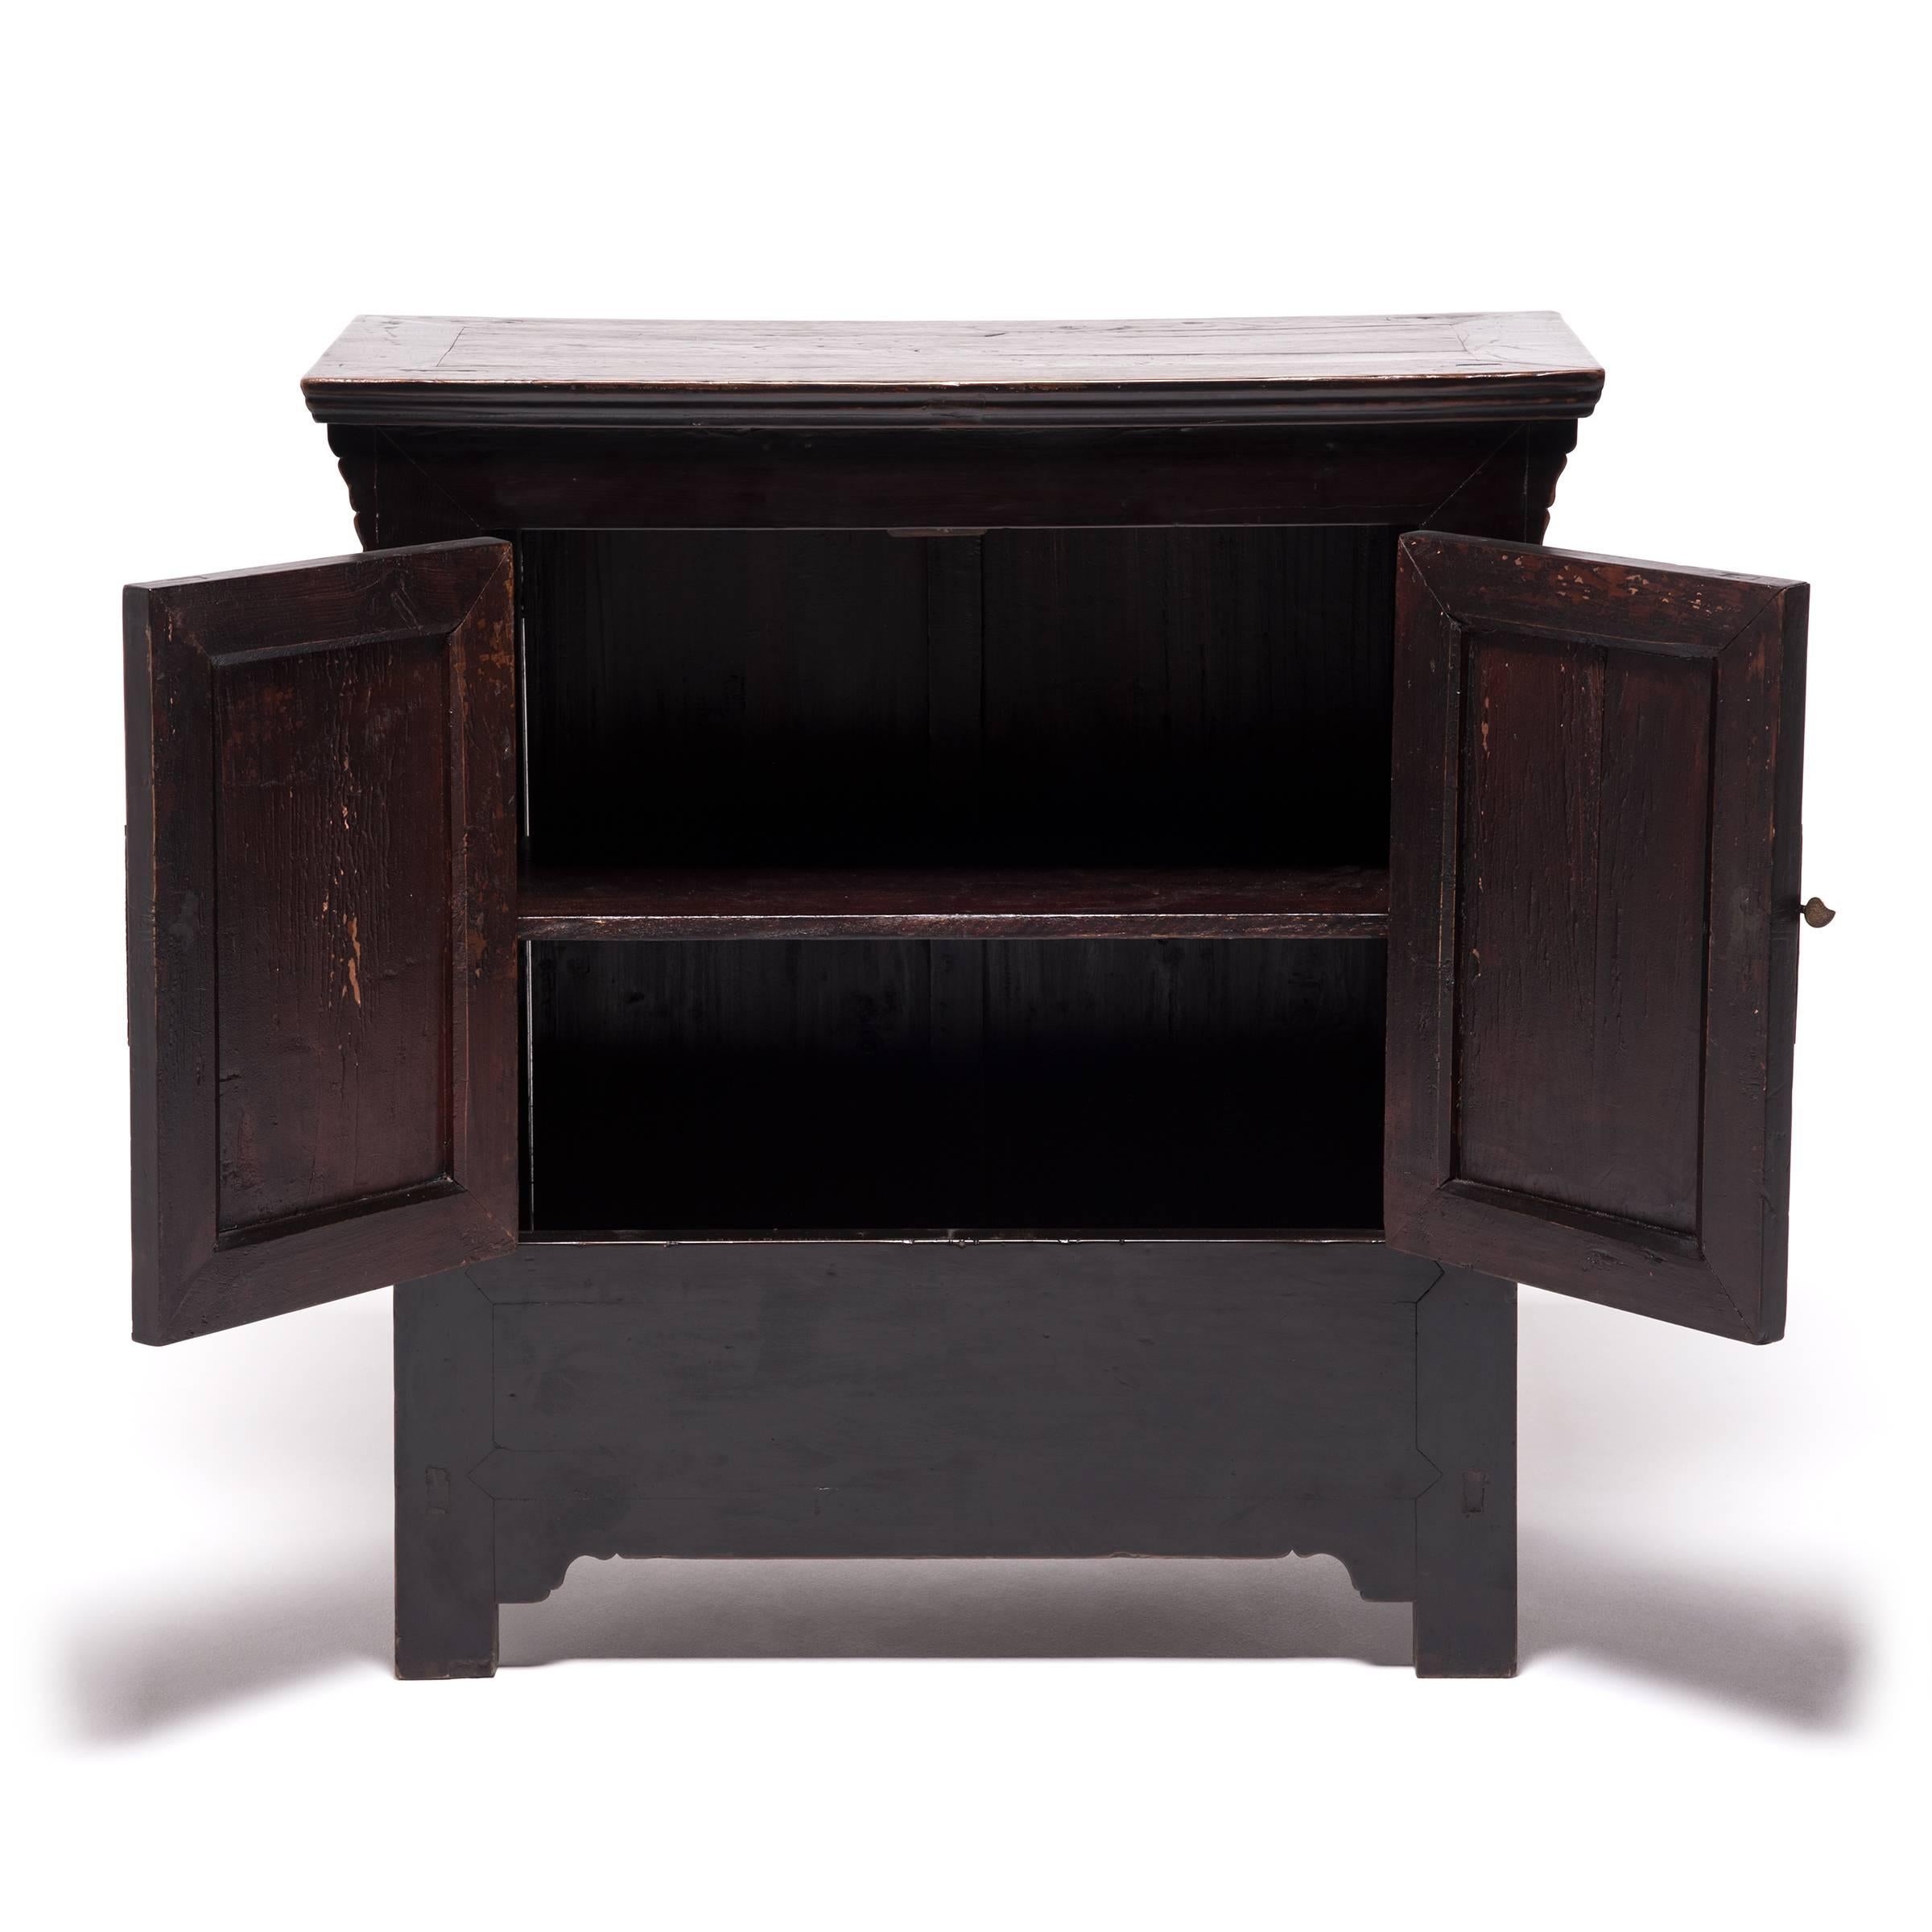 If you appreciate the austere beauty of Chinese furniture but also want a design that speaks to modern tastes, this chest may be perfect for you. Classic mortise and tenon joinery, substantial hardware, and simple lines provide a spirit of solidity